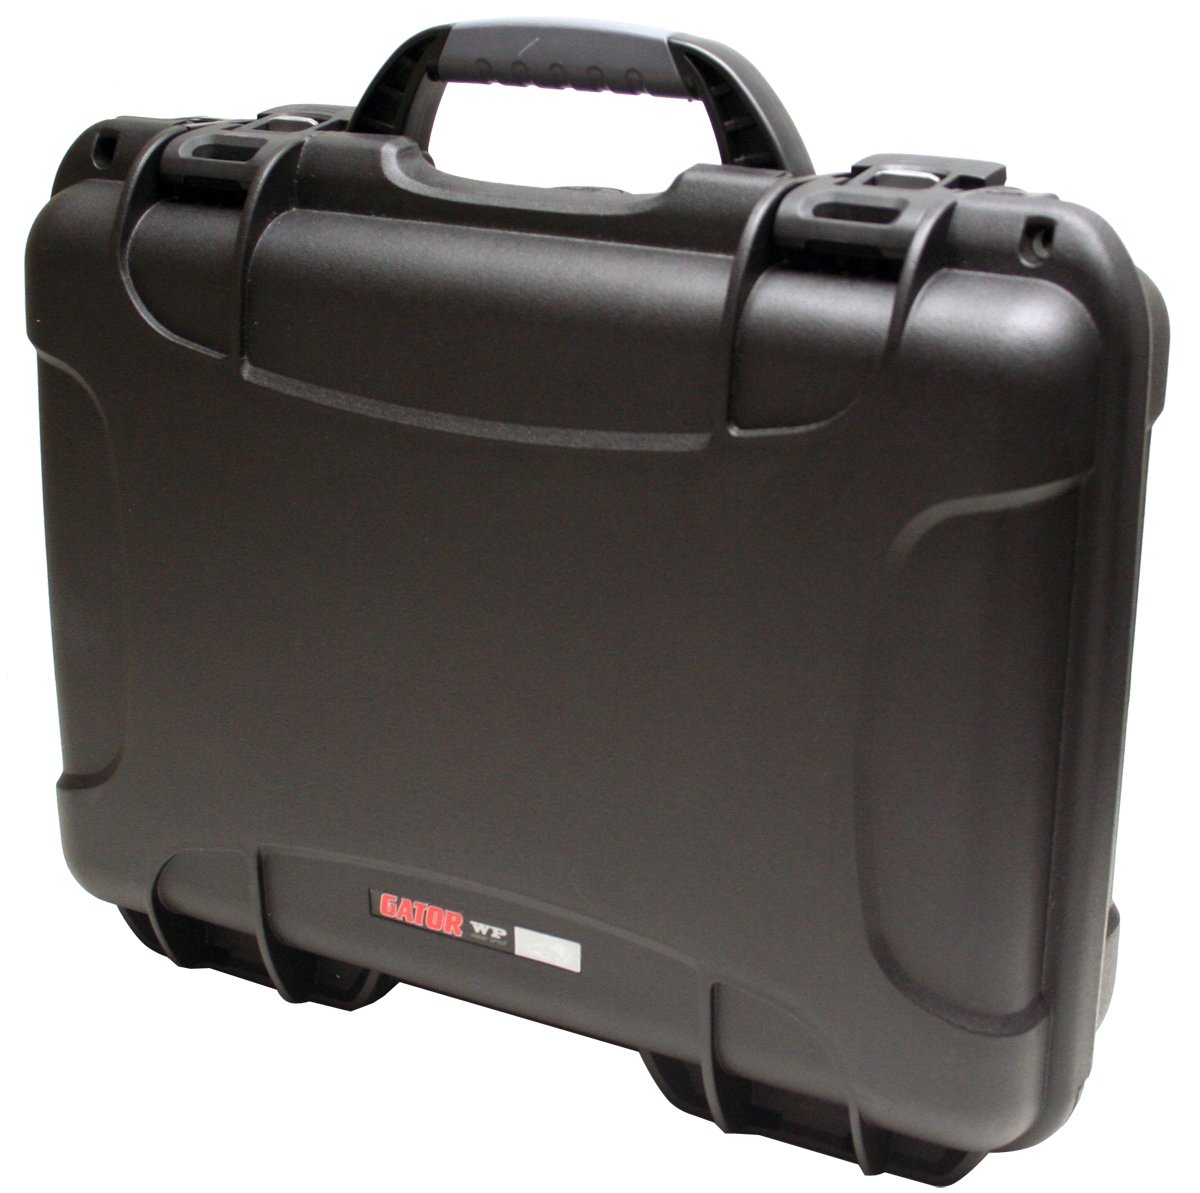 Black Waterproof Injection molded case, with interior dimensions of 13.2" x 9.2" x 3.8". NO FOAM